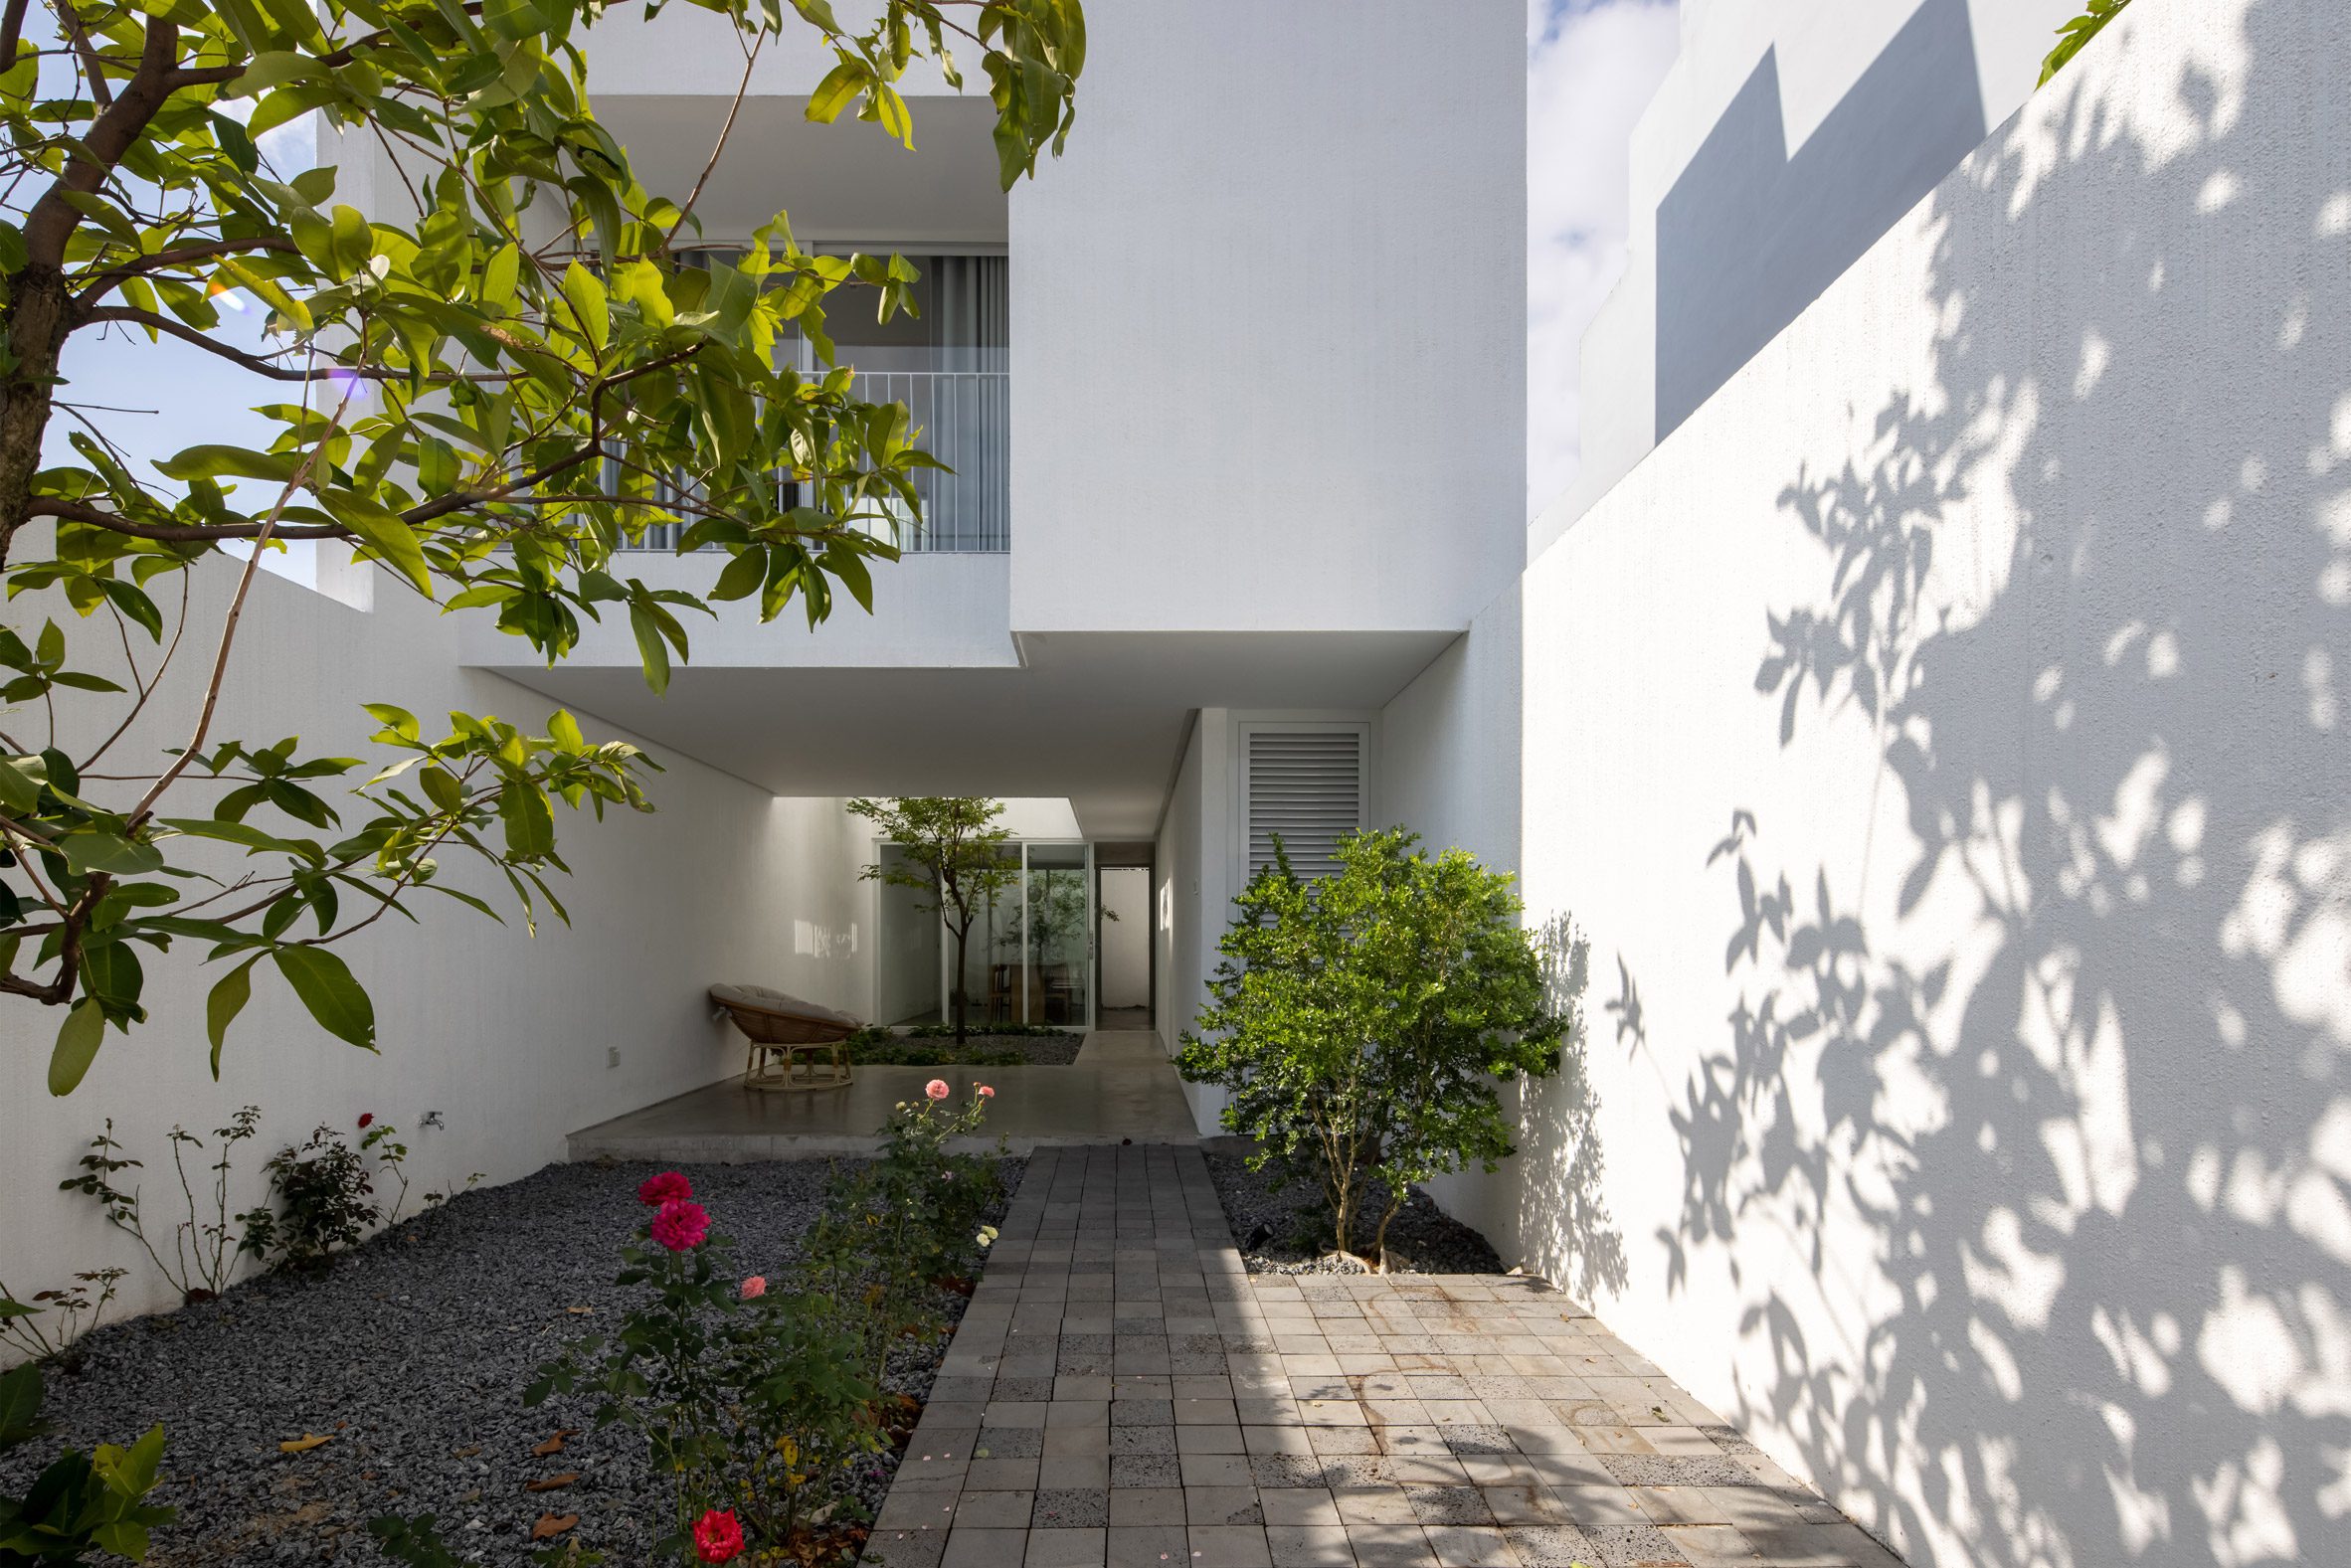 Courtyard within House for Young Families in Vietnam